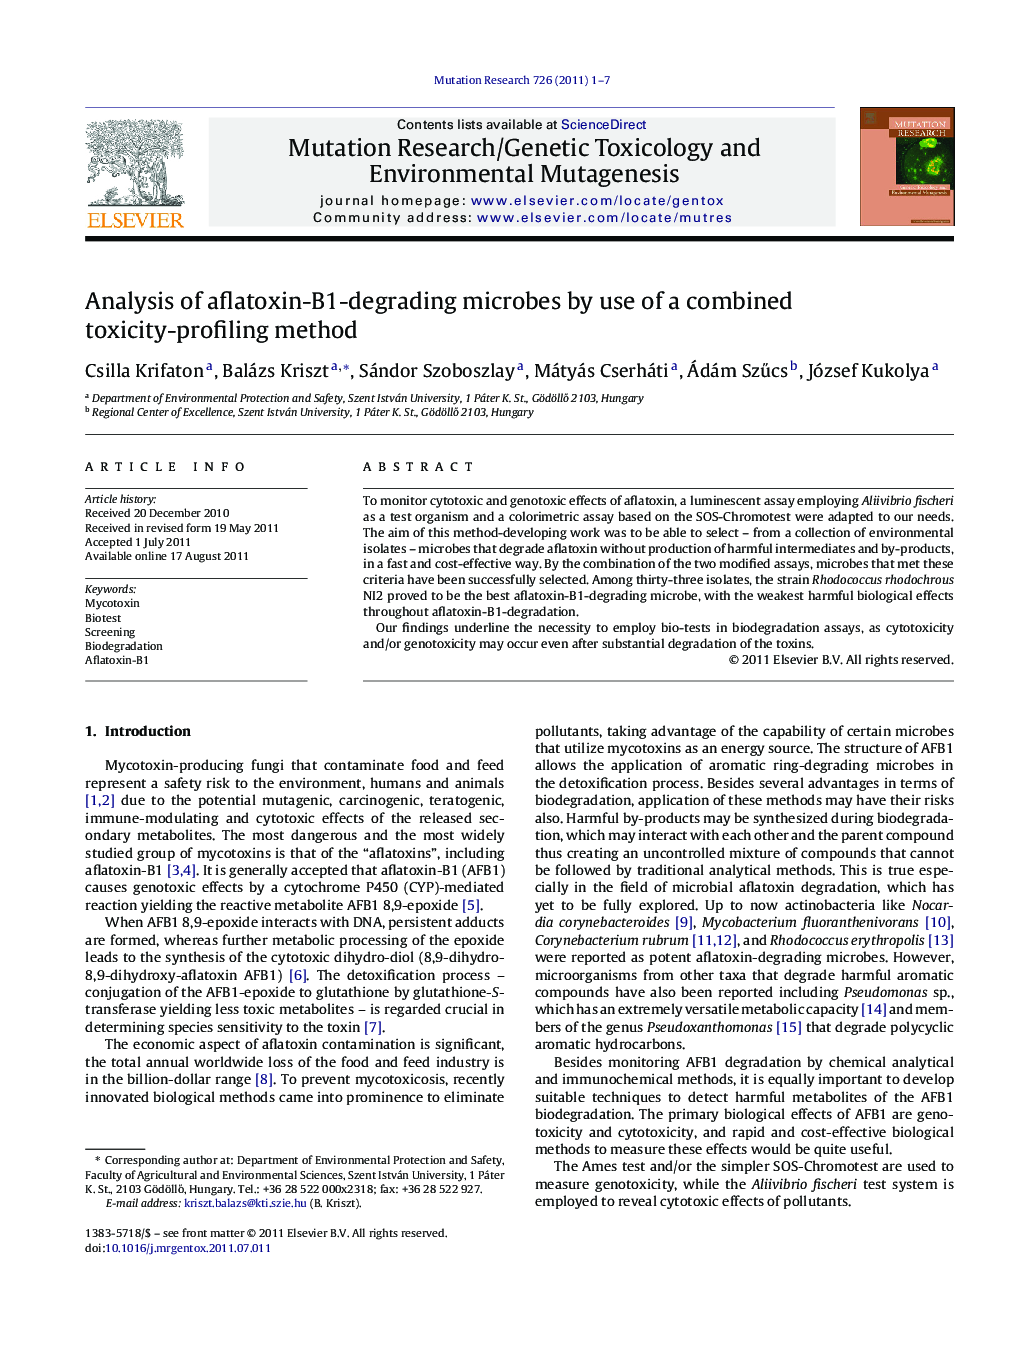 Analysis of aflatoxin-B1-degrading microbes by use of a combined toxicity-profiling method